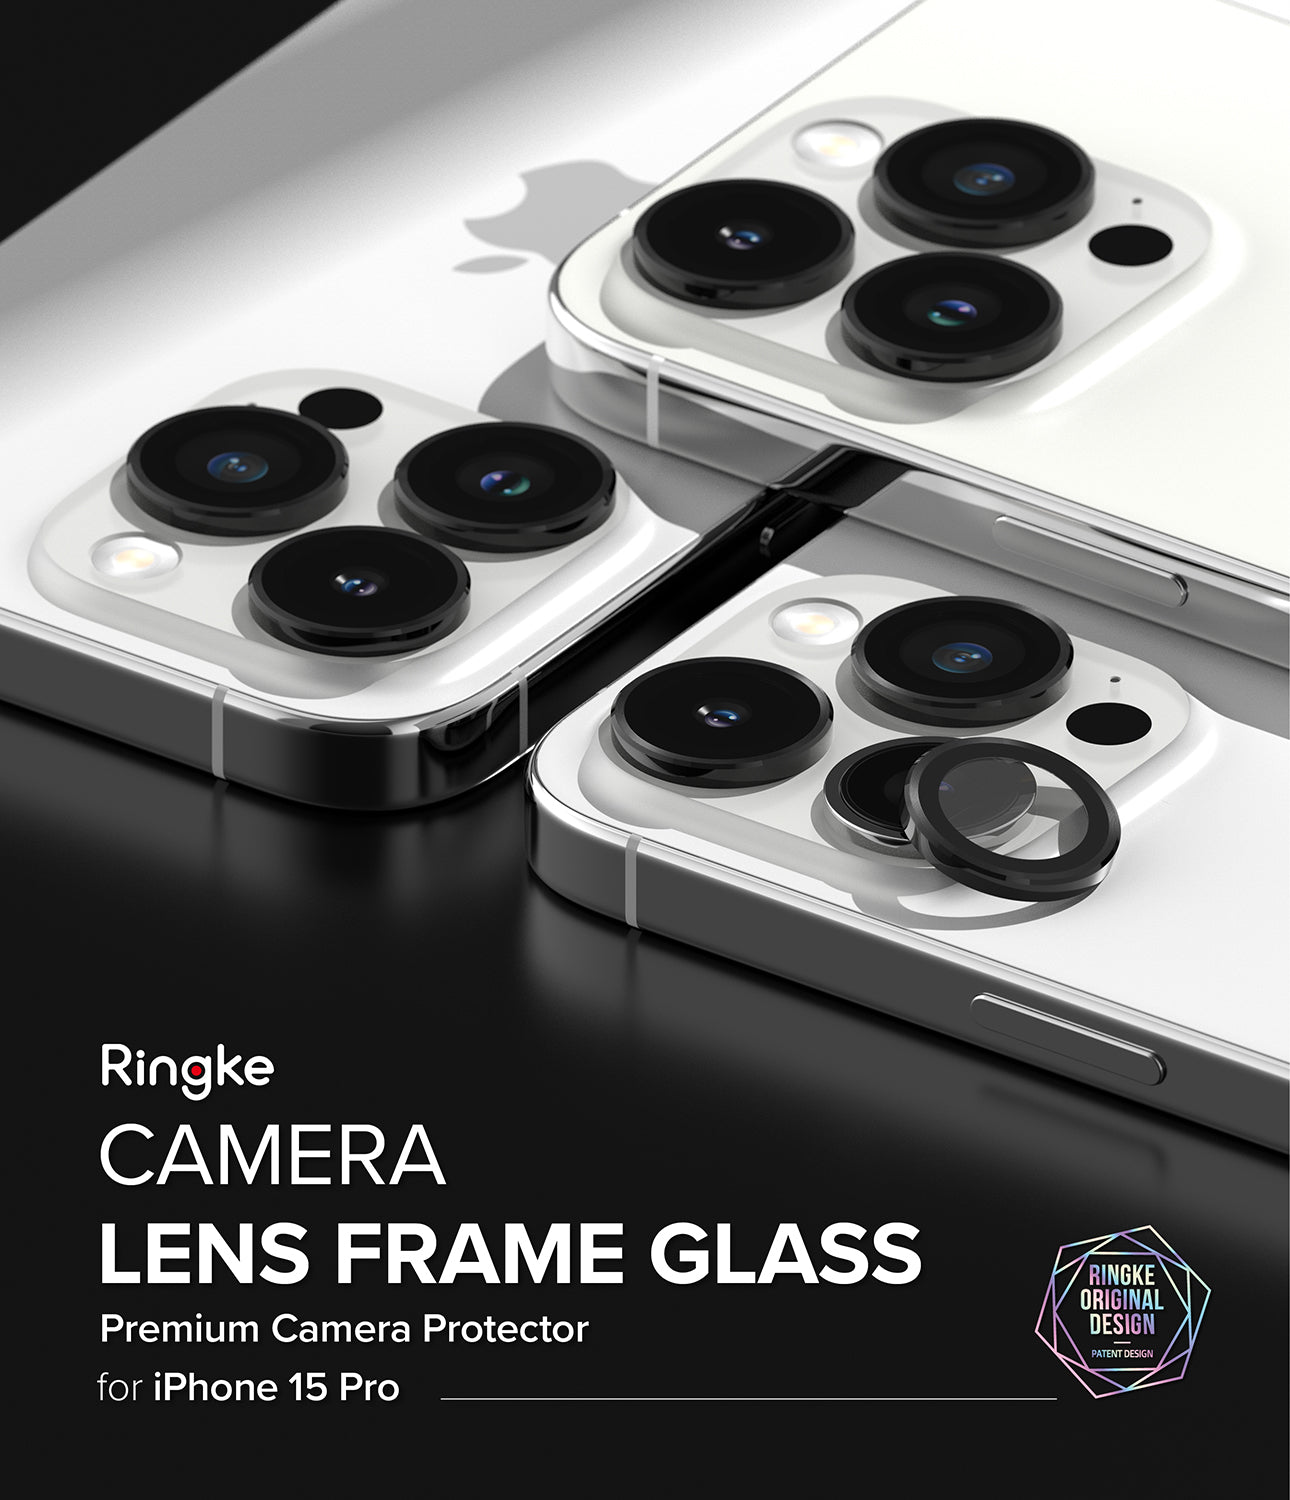 iPhone 15 Pro | Camera Lens Frame Glass - By Ringke